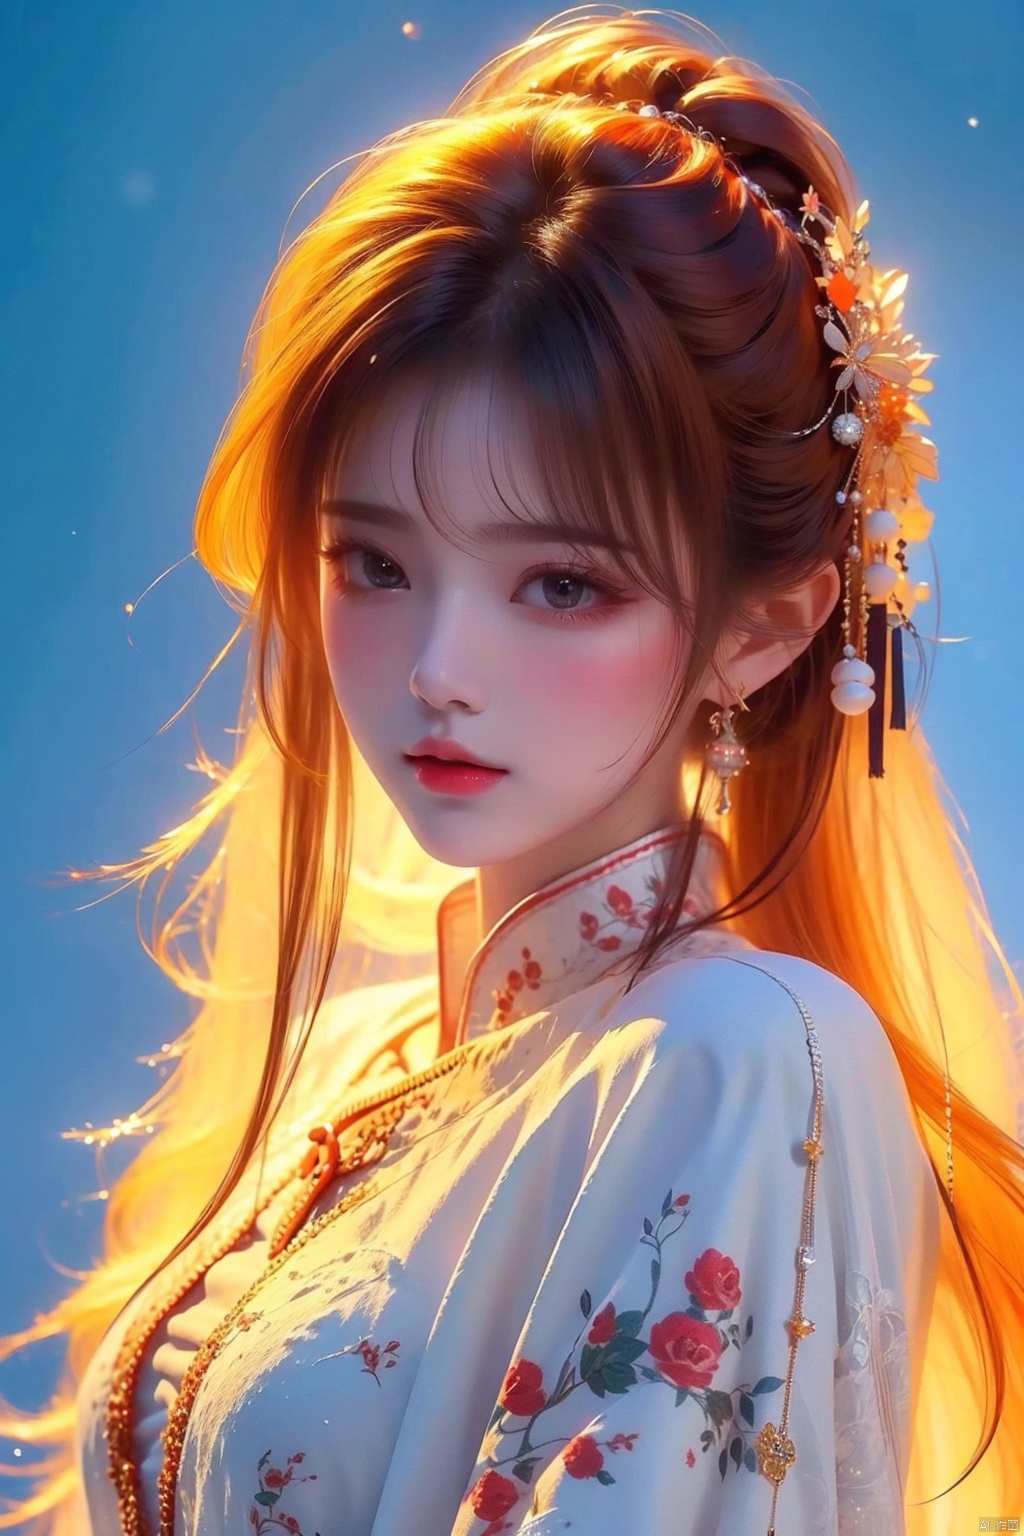 Best quality + masterpiece + Extremely high resolution +1 loli+ looking at the audience + detailed face + orange hair + deep eyes + dress + full bodyimage,,, masterpiece, best quality, mtianmei, mpaidui, 1 girl